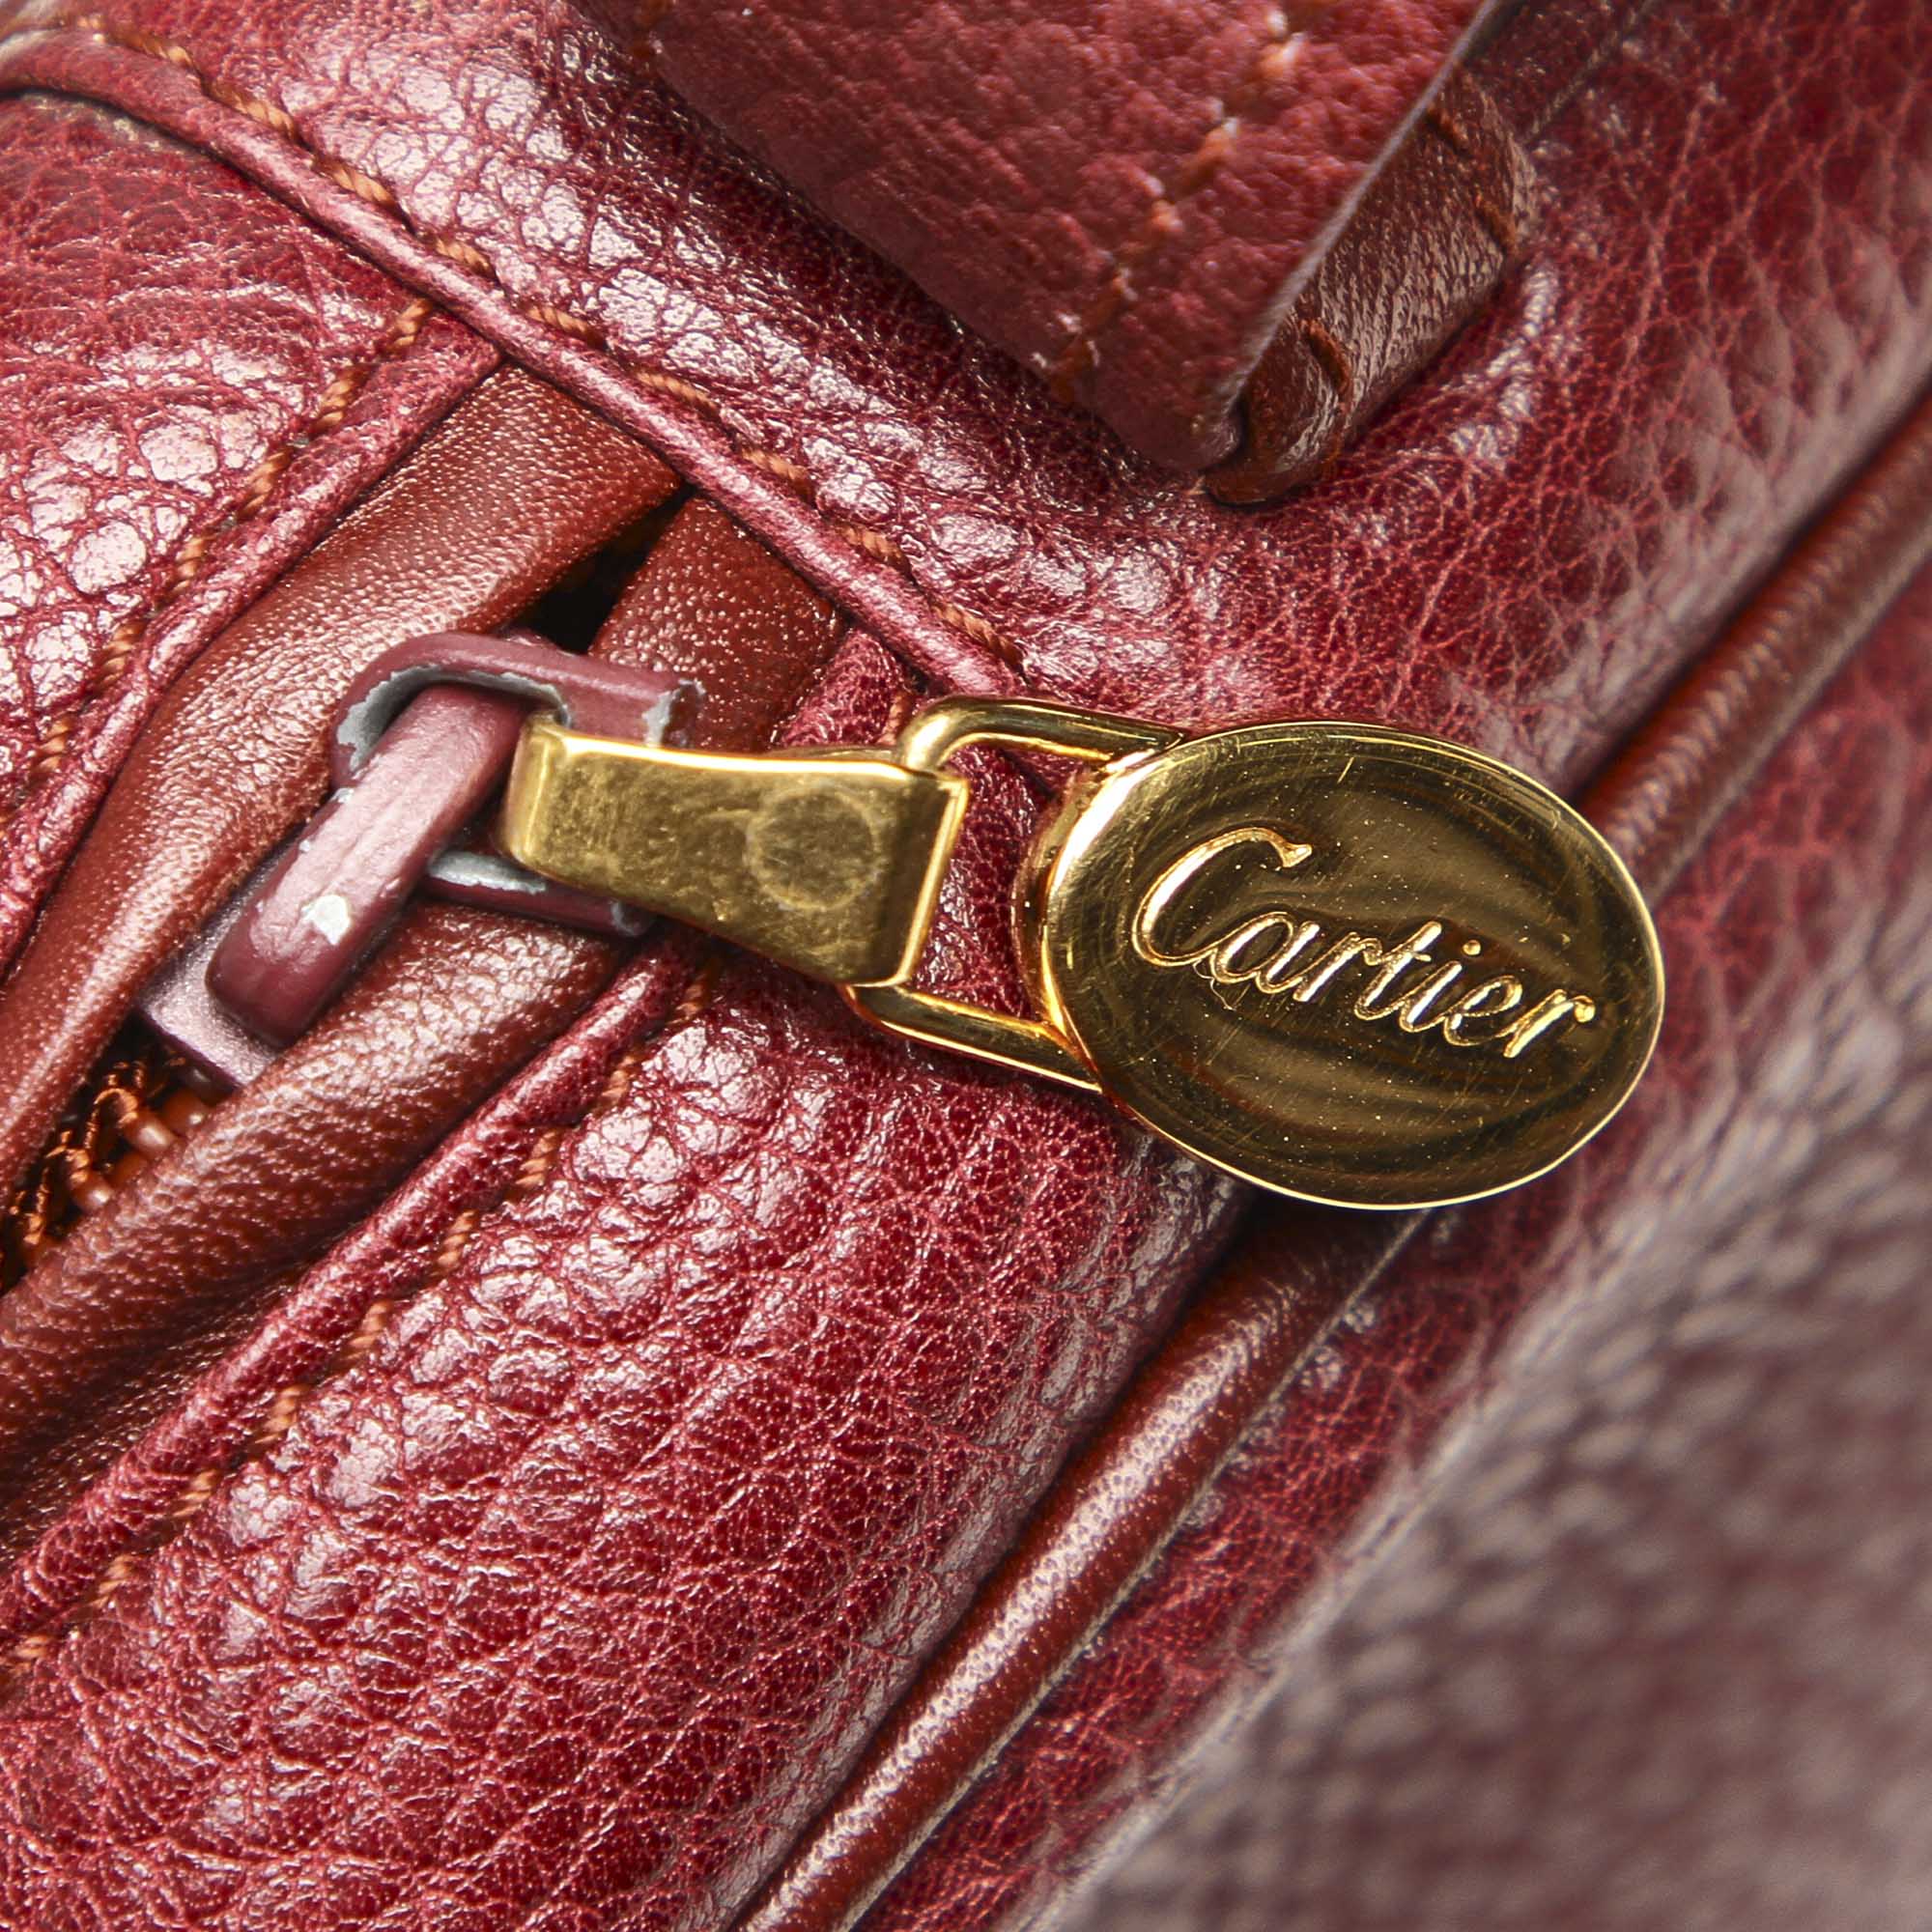 cartier luggage